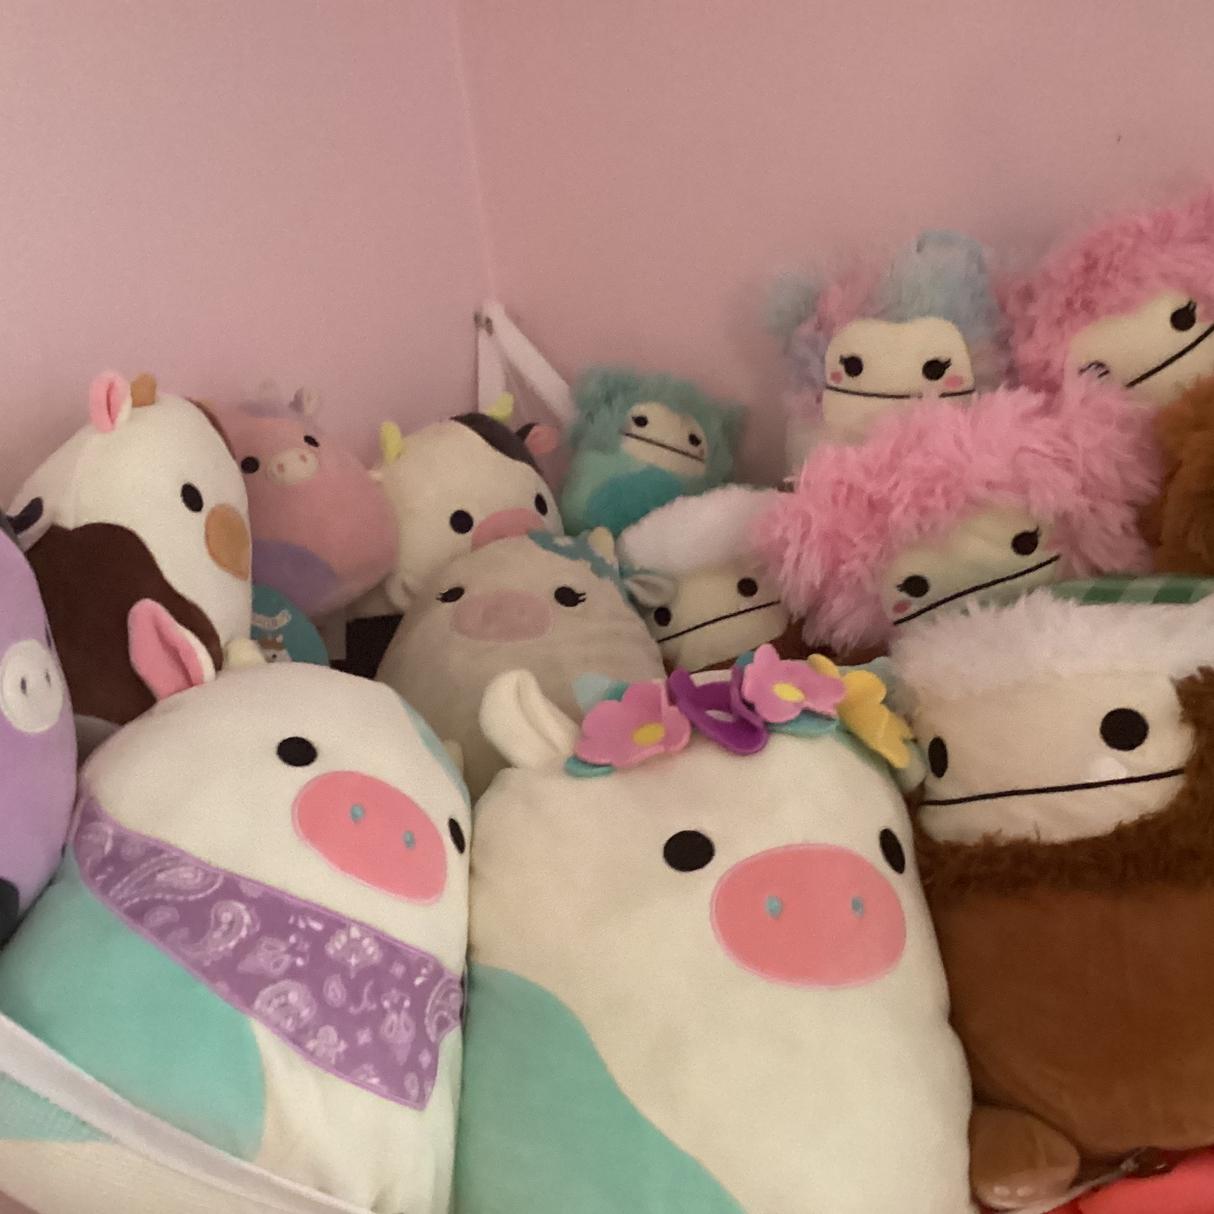 Squishmallow123's images